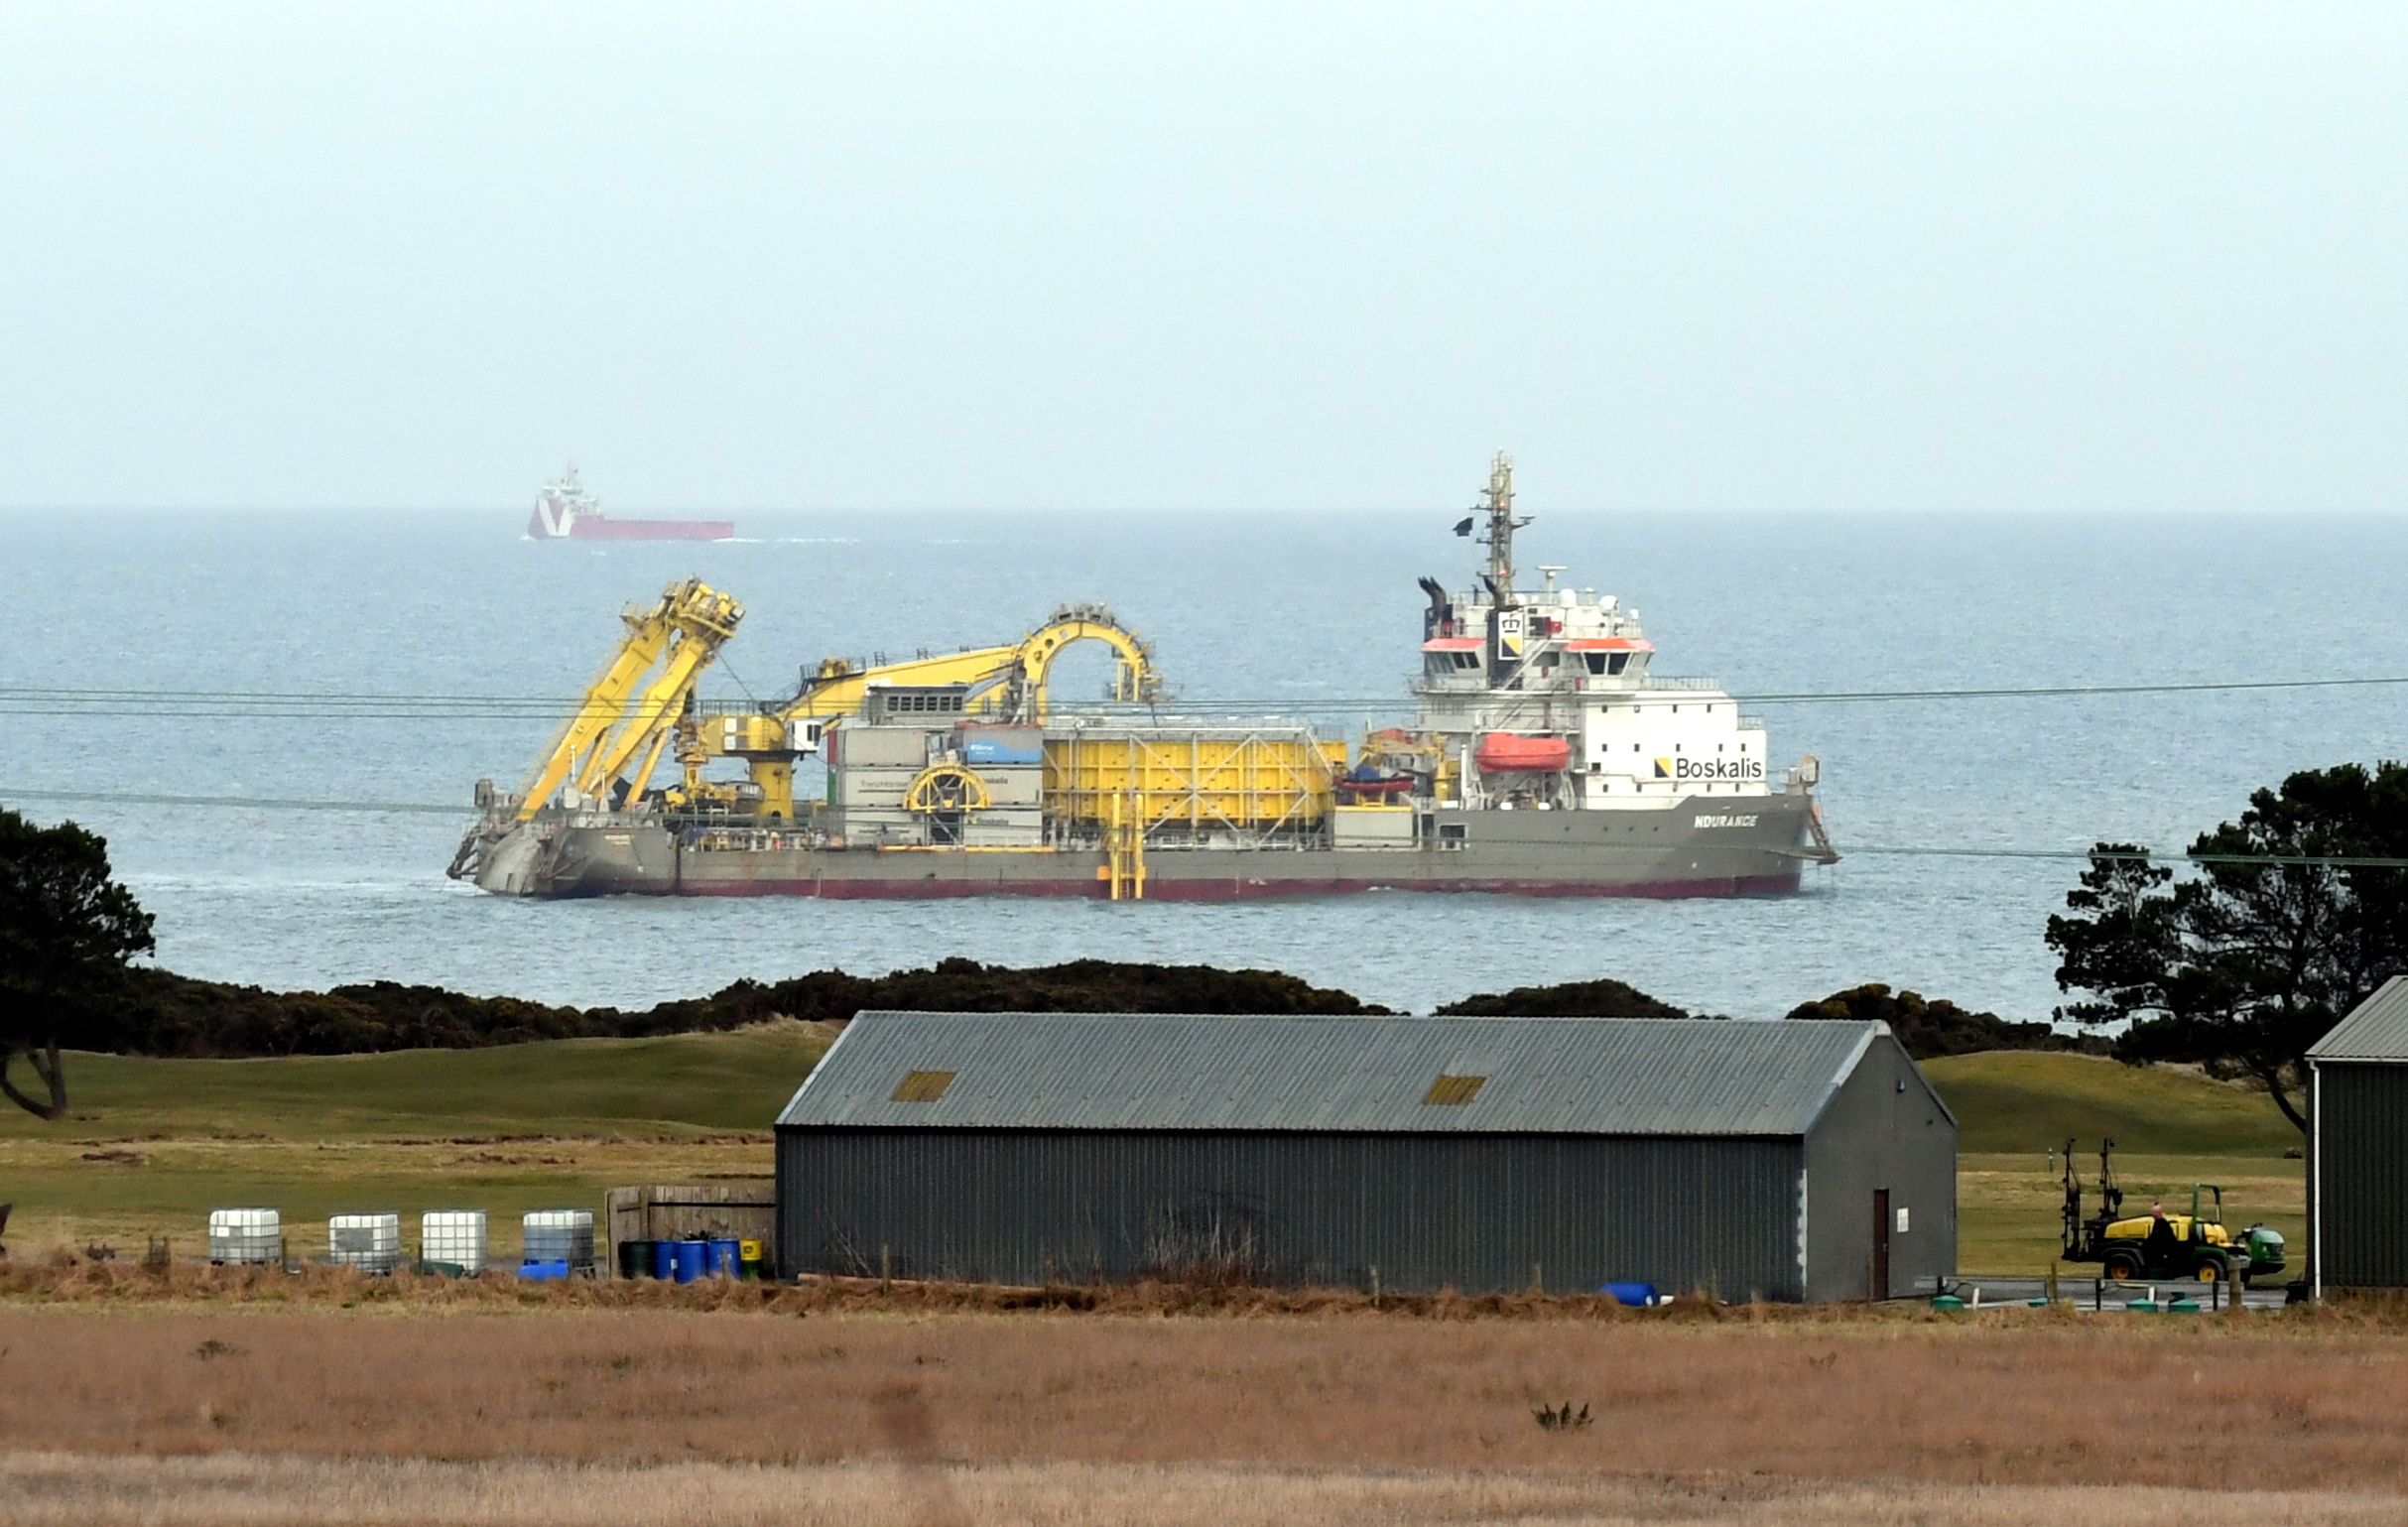 The cable layer vessel Ndurance working just off the coast at Blackdog Aberdeen for Vattenfall. February 2018.